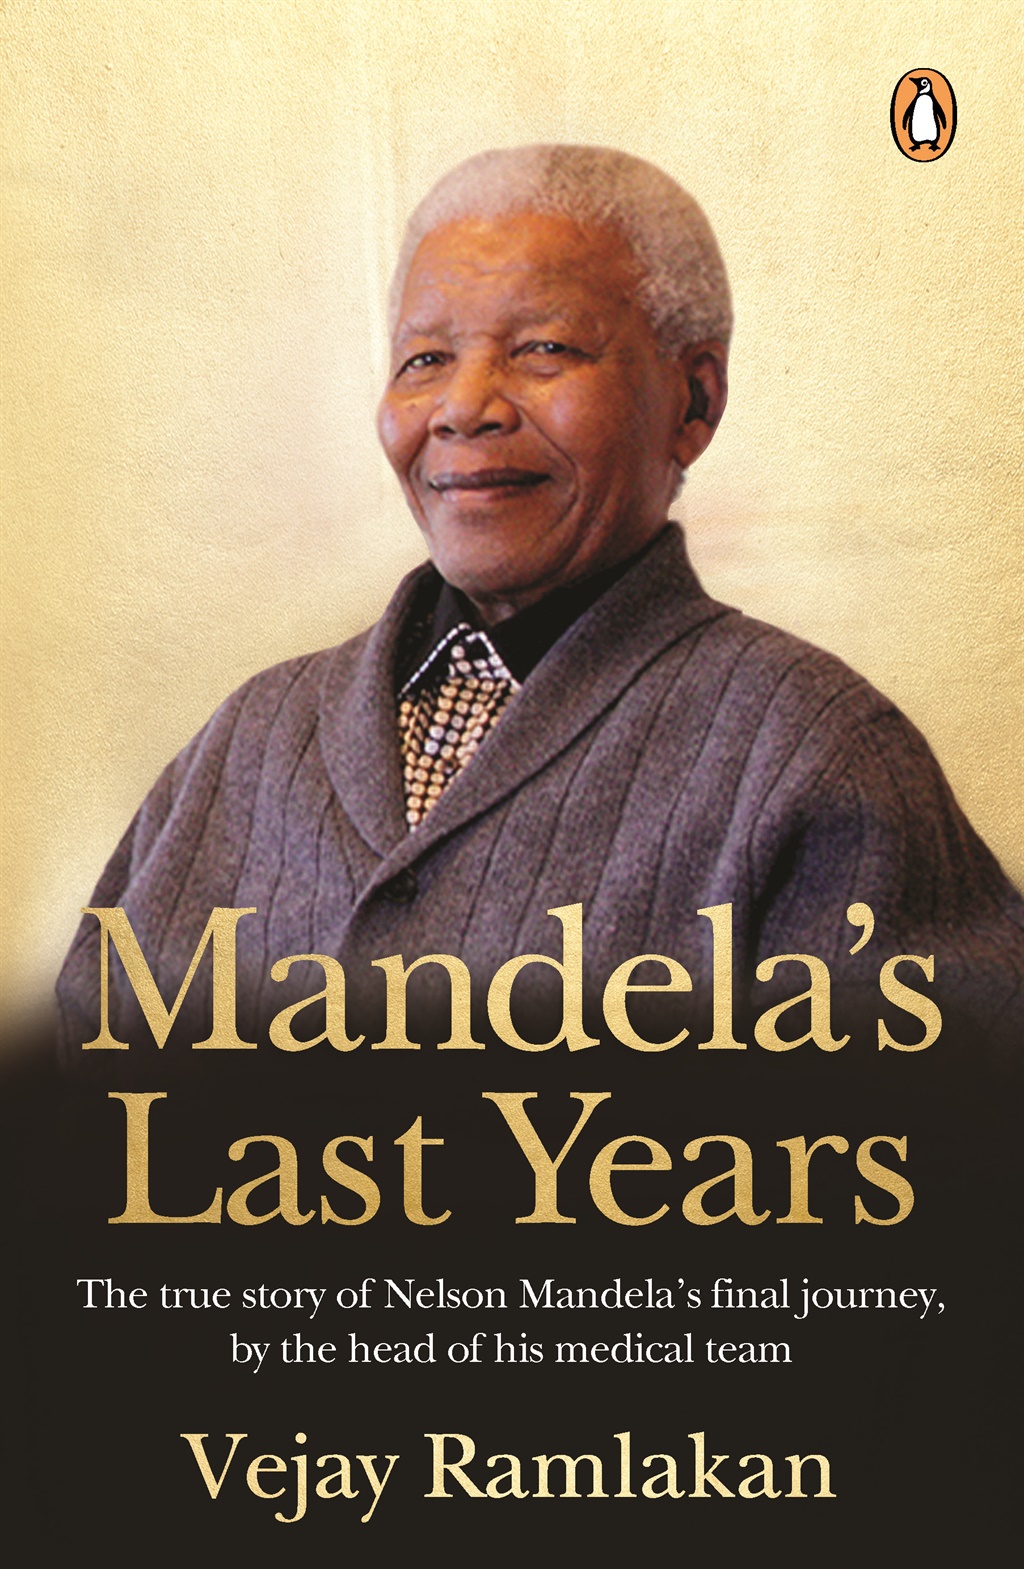 mandelas last years DAILY MAVERICK 168: Two new books offer an insider’s view of Nelson & Winnie’s tempestuous yet enduring love